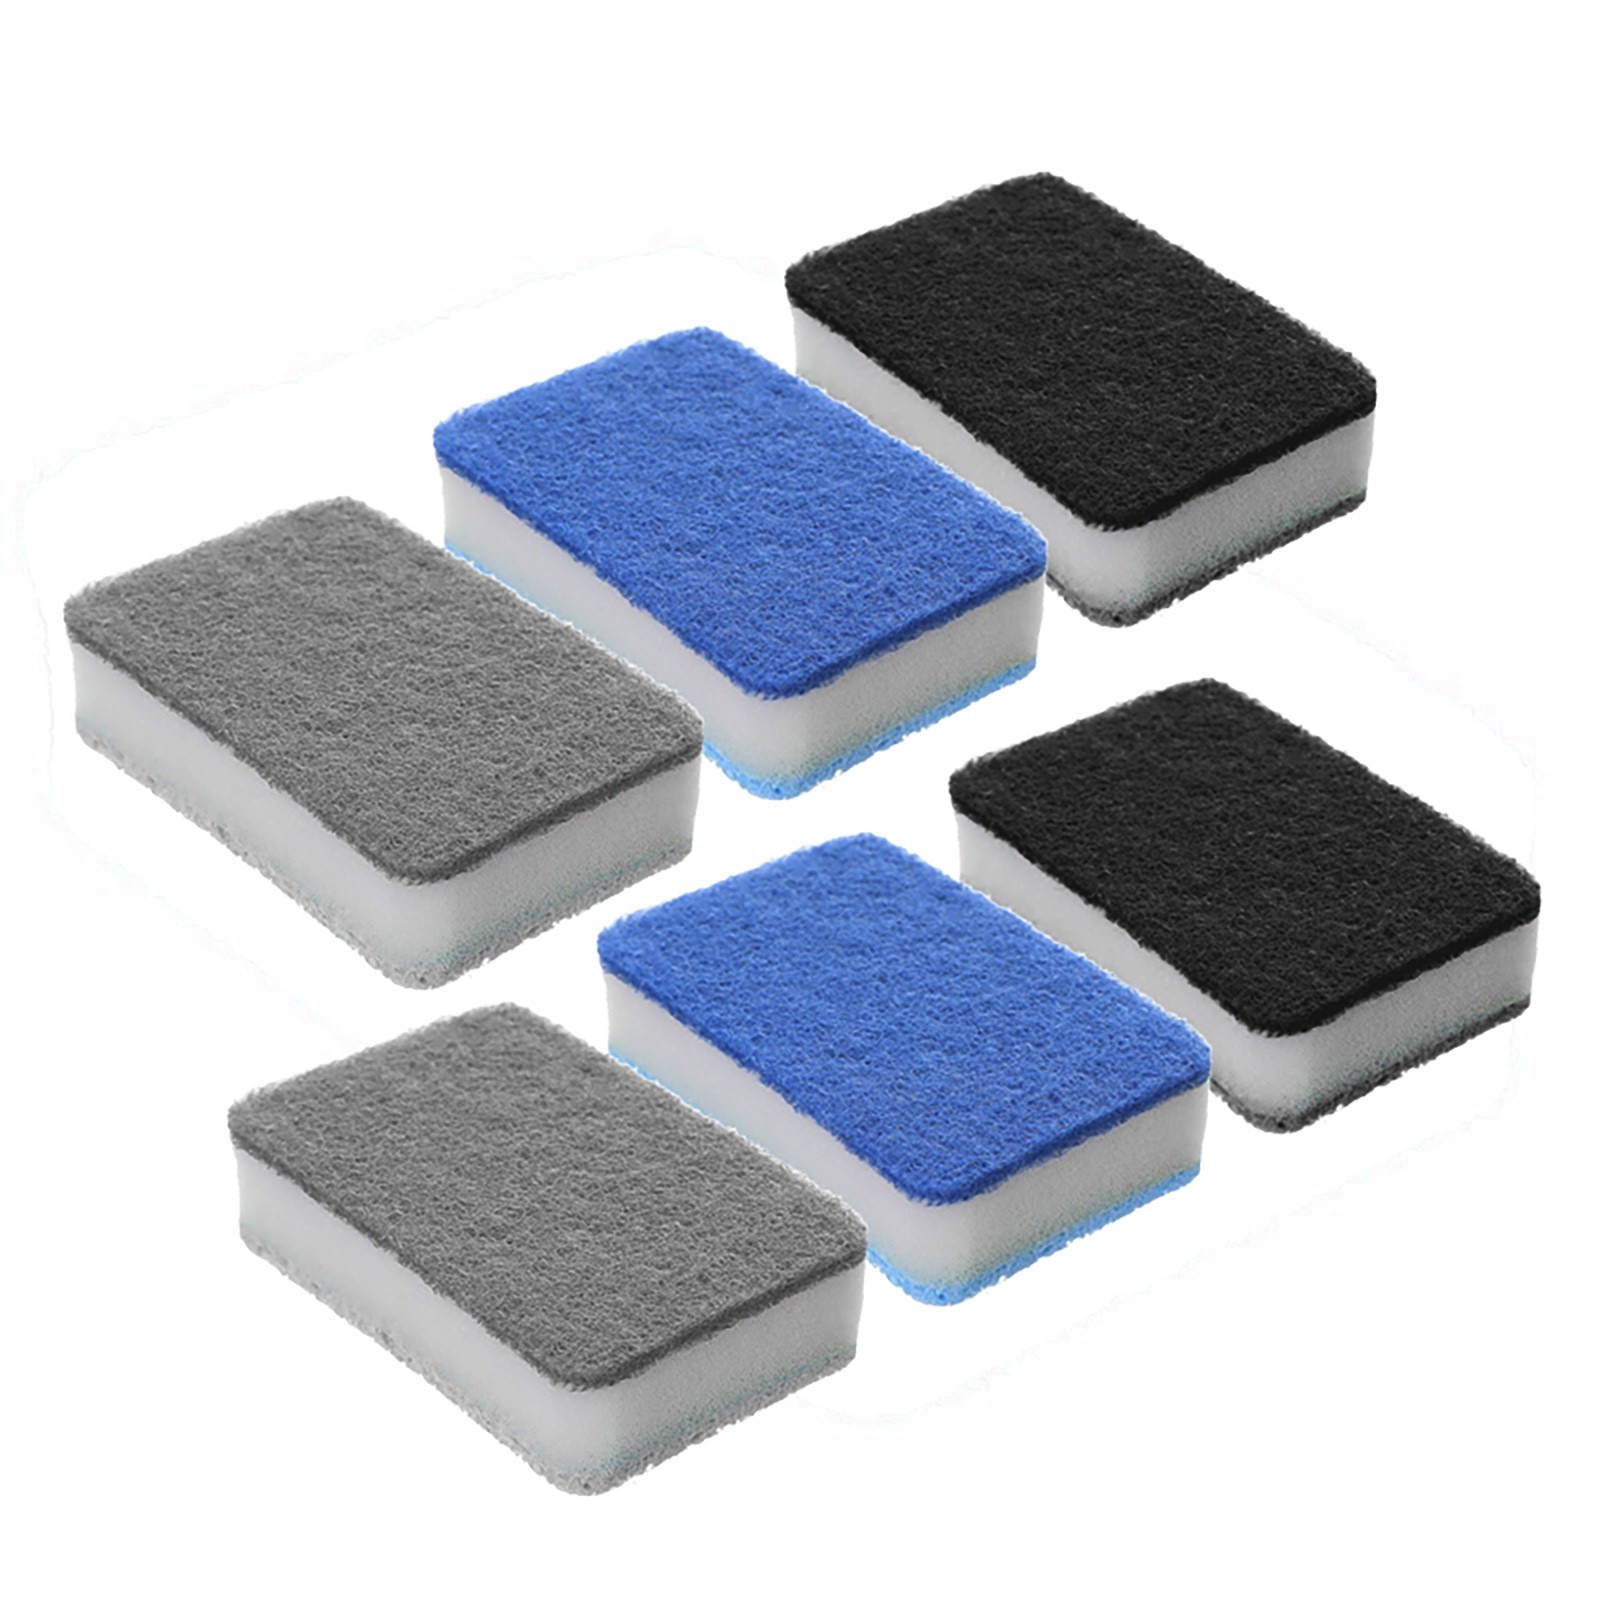 6PCS Magic Cleaning Sponge Decontamination Scouring Pad Oil Stain Remover Double Sided Dishwashing Sponge Brush Kitchen Cleaner